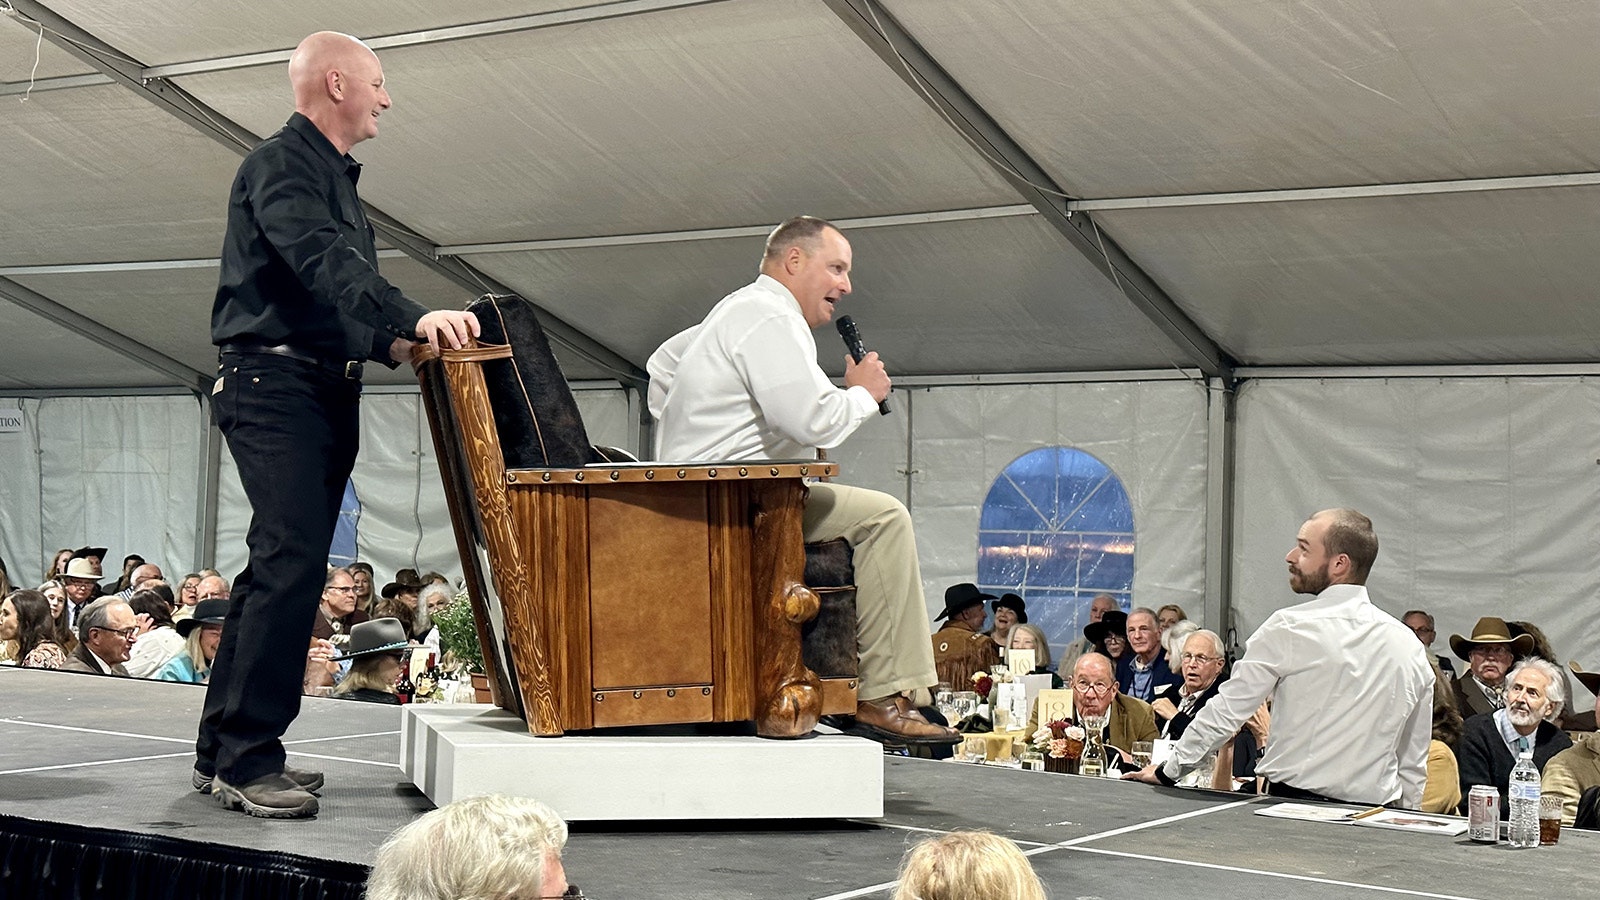 Auctioneer Troy Black takes a ride on a Molesworth-style club chair built by Ian Gallis of By Western Hands during the 42nd Buffalo Bill Art Show and Sale Live Auction. The chair sold for $10,000.